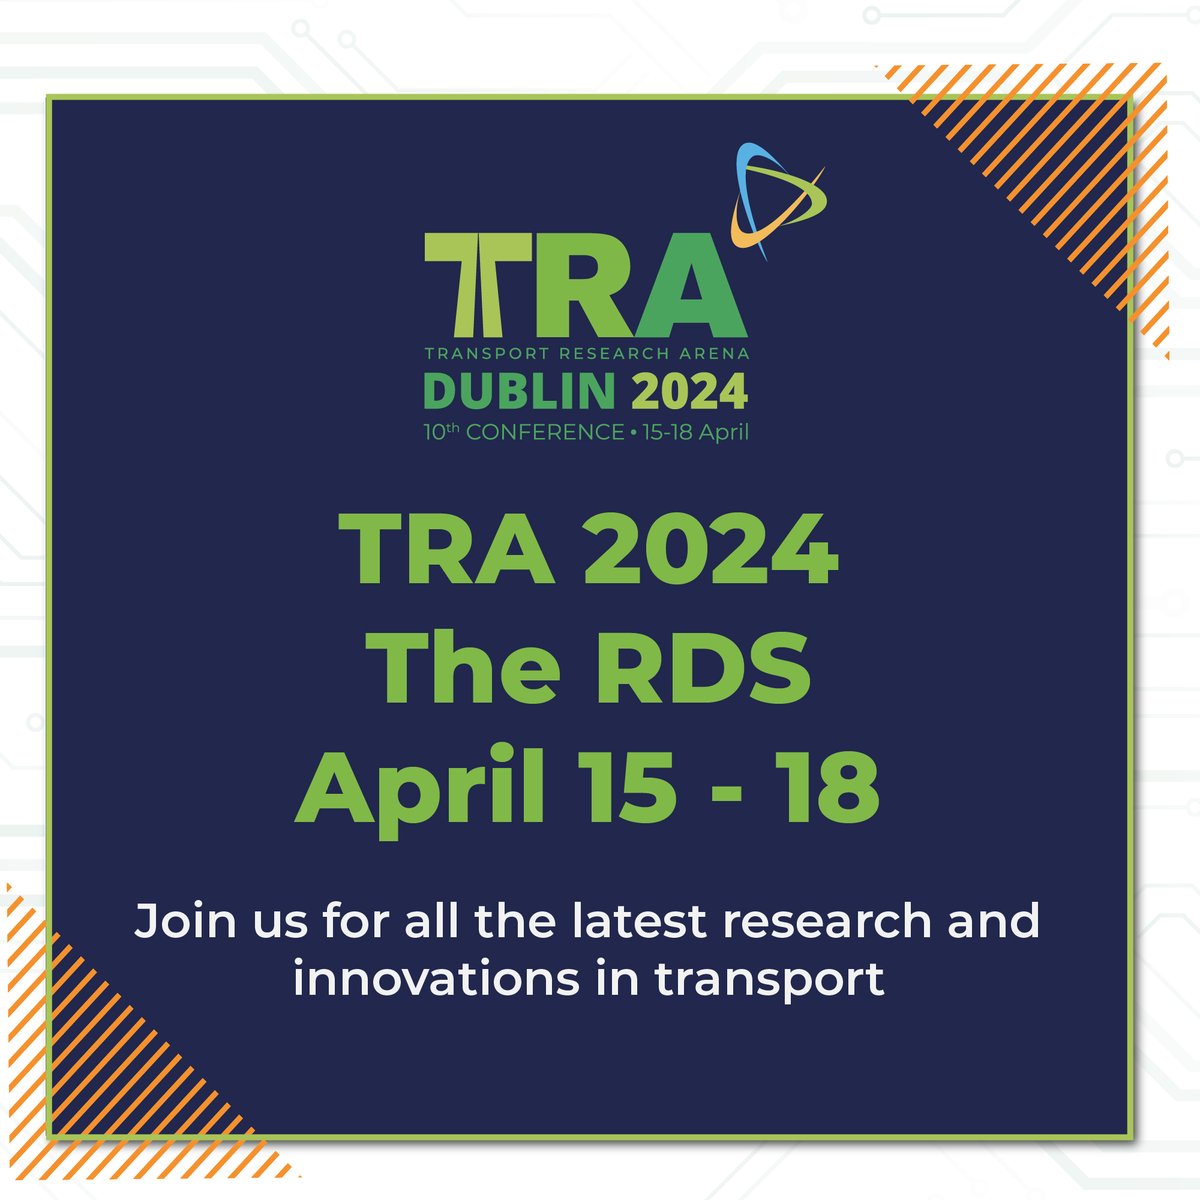 We are pleased to be supporting the 2024 TRA event this week in Dublin!